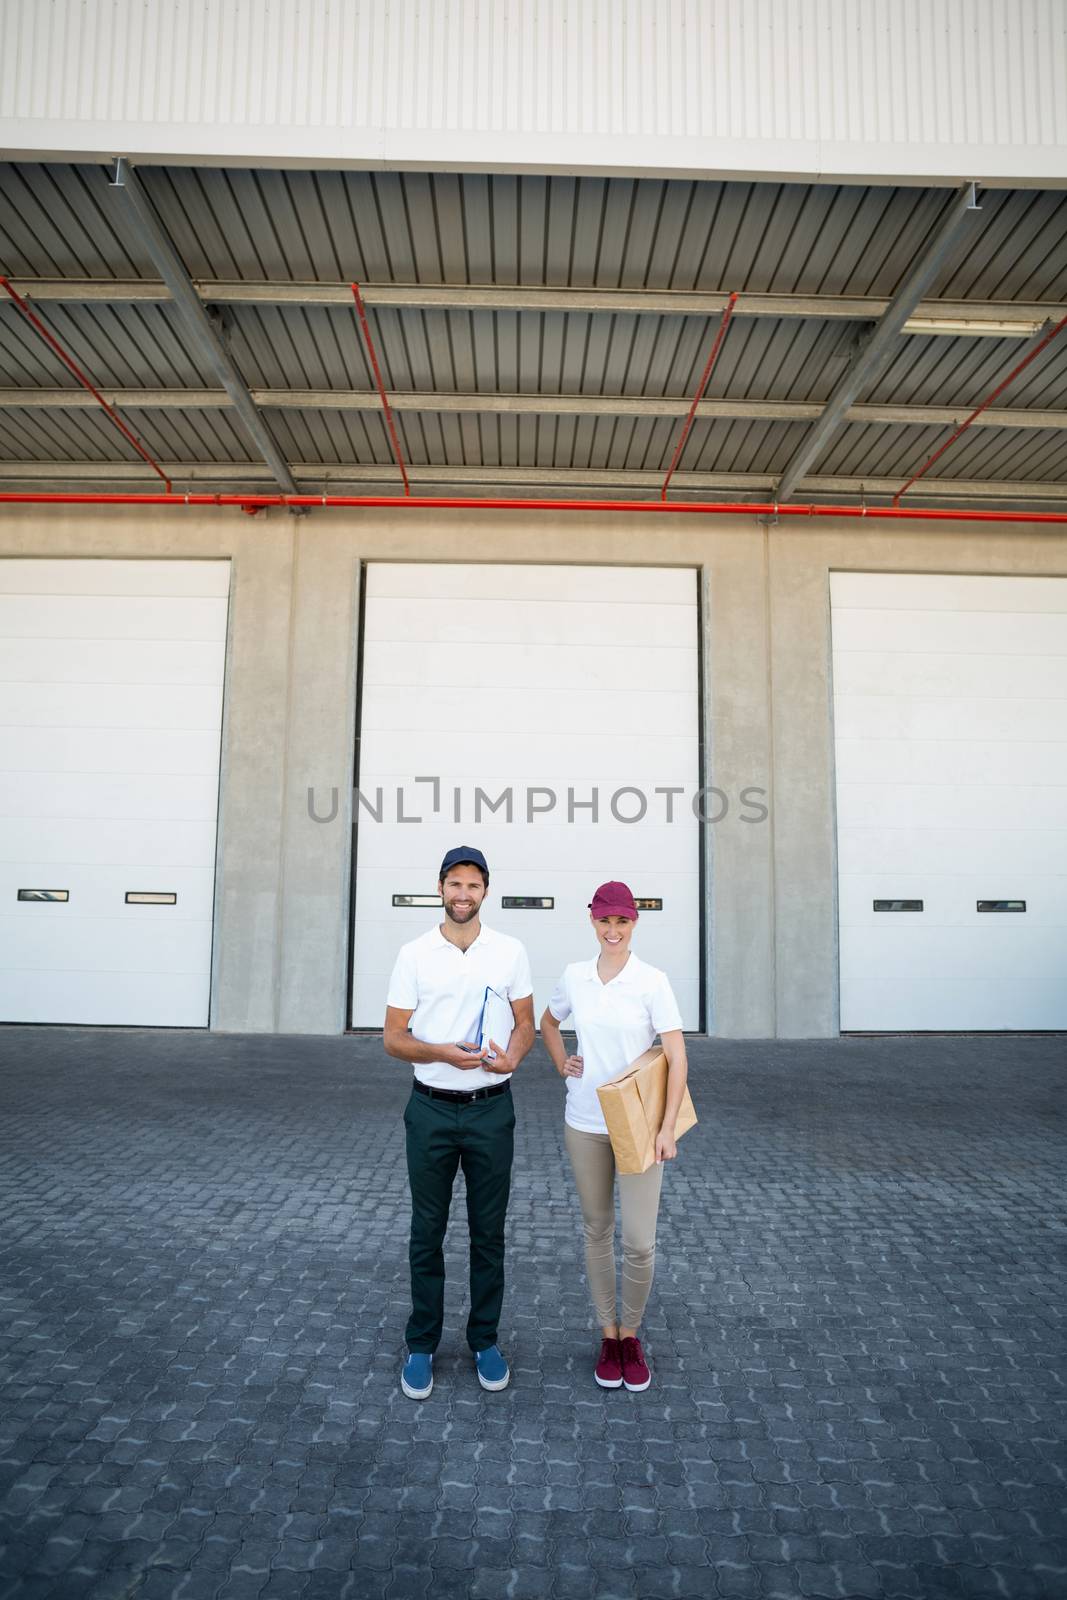 Delivery people are posing and holding goods in front of a warehouse